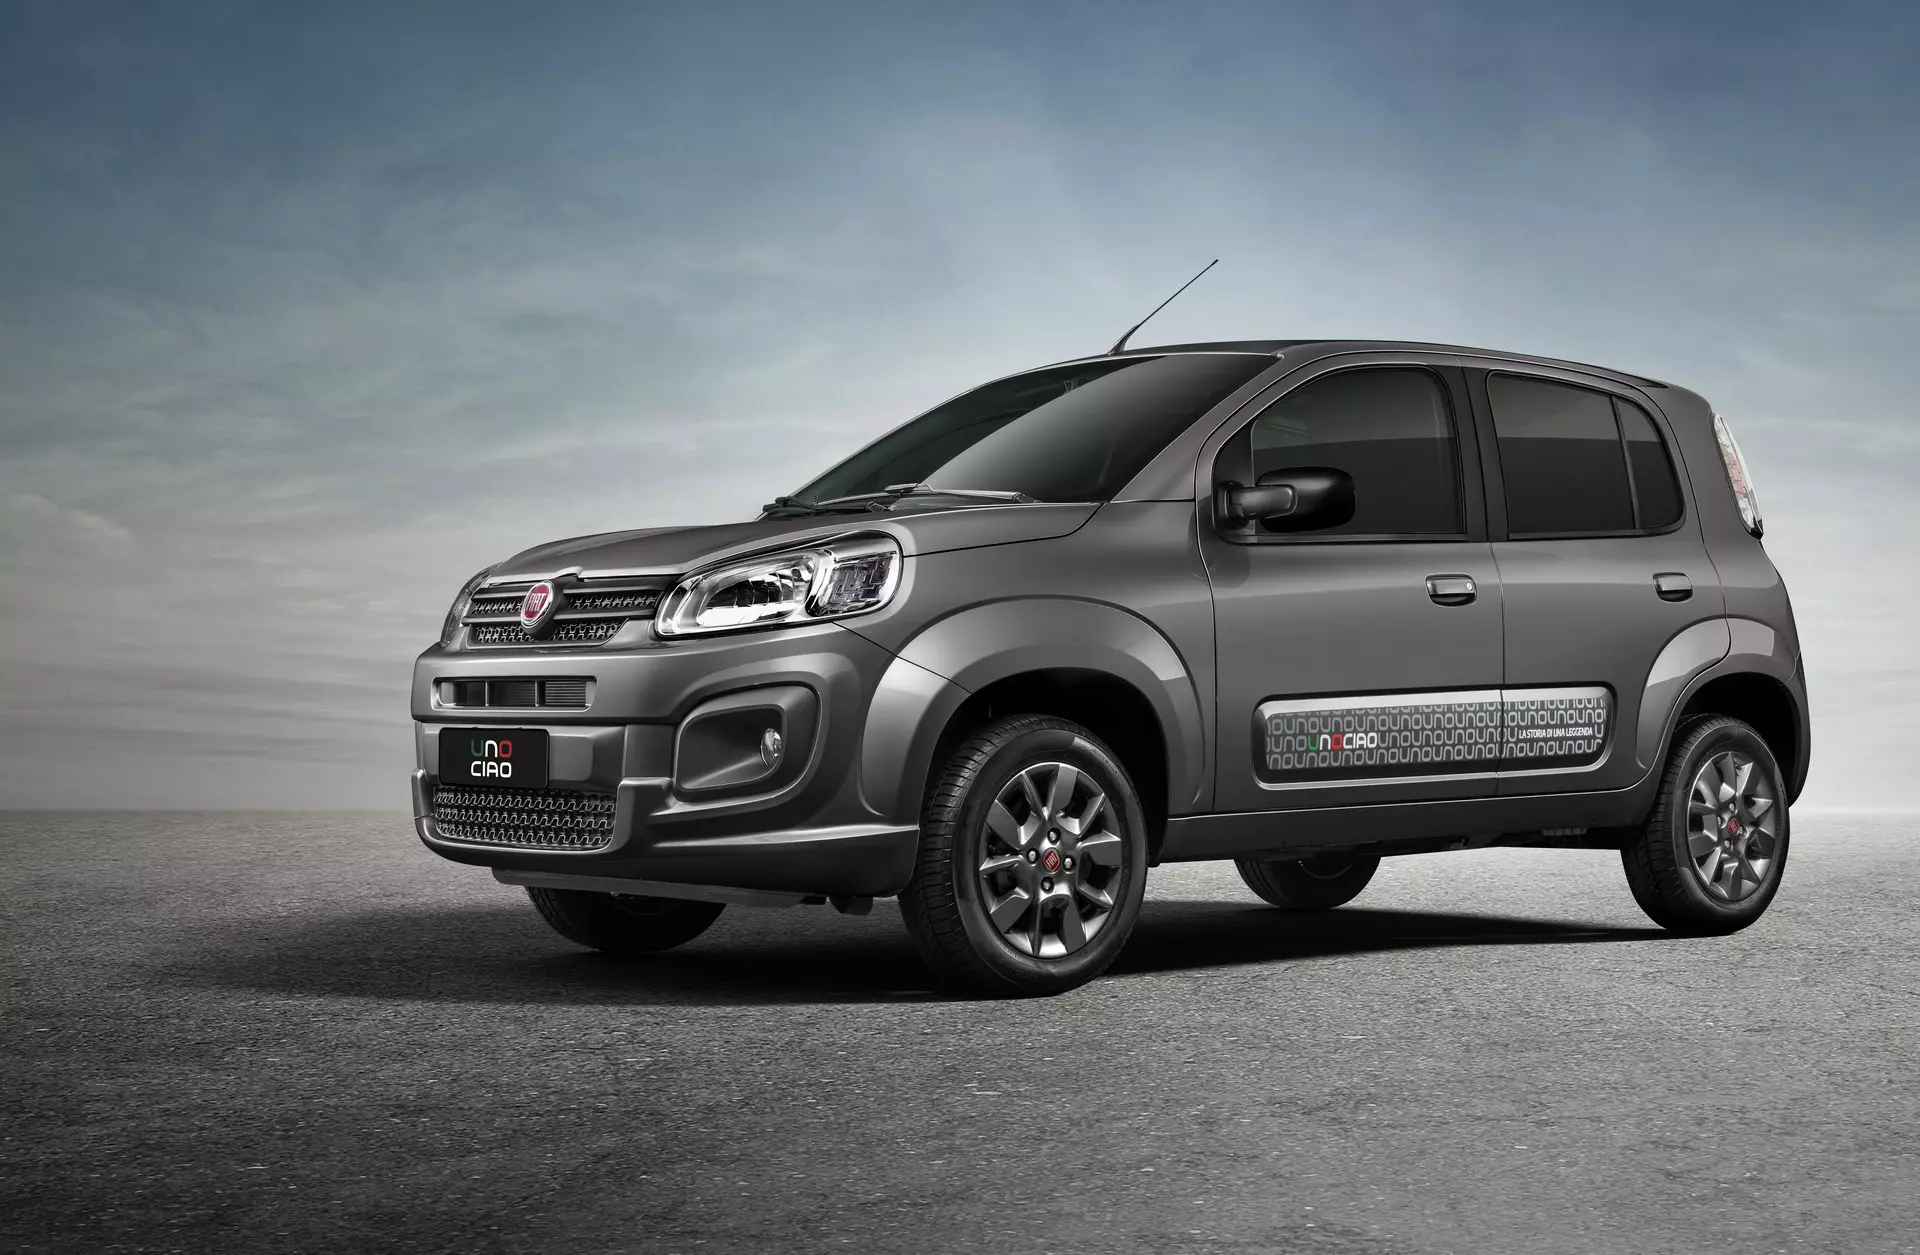 2022 Fiat Uno Ciao: Price and Features